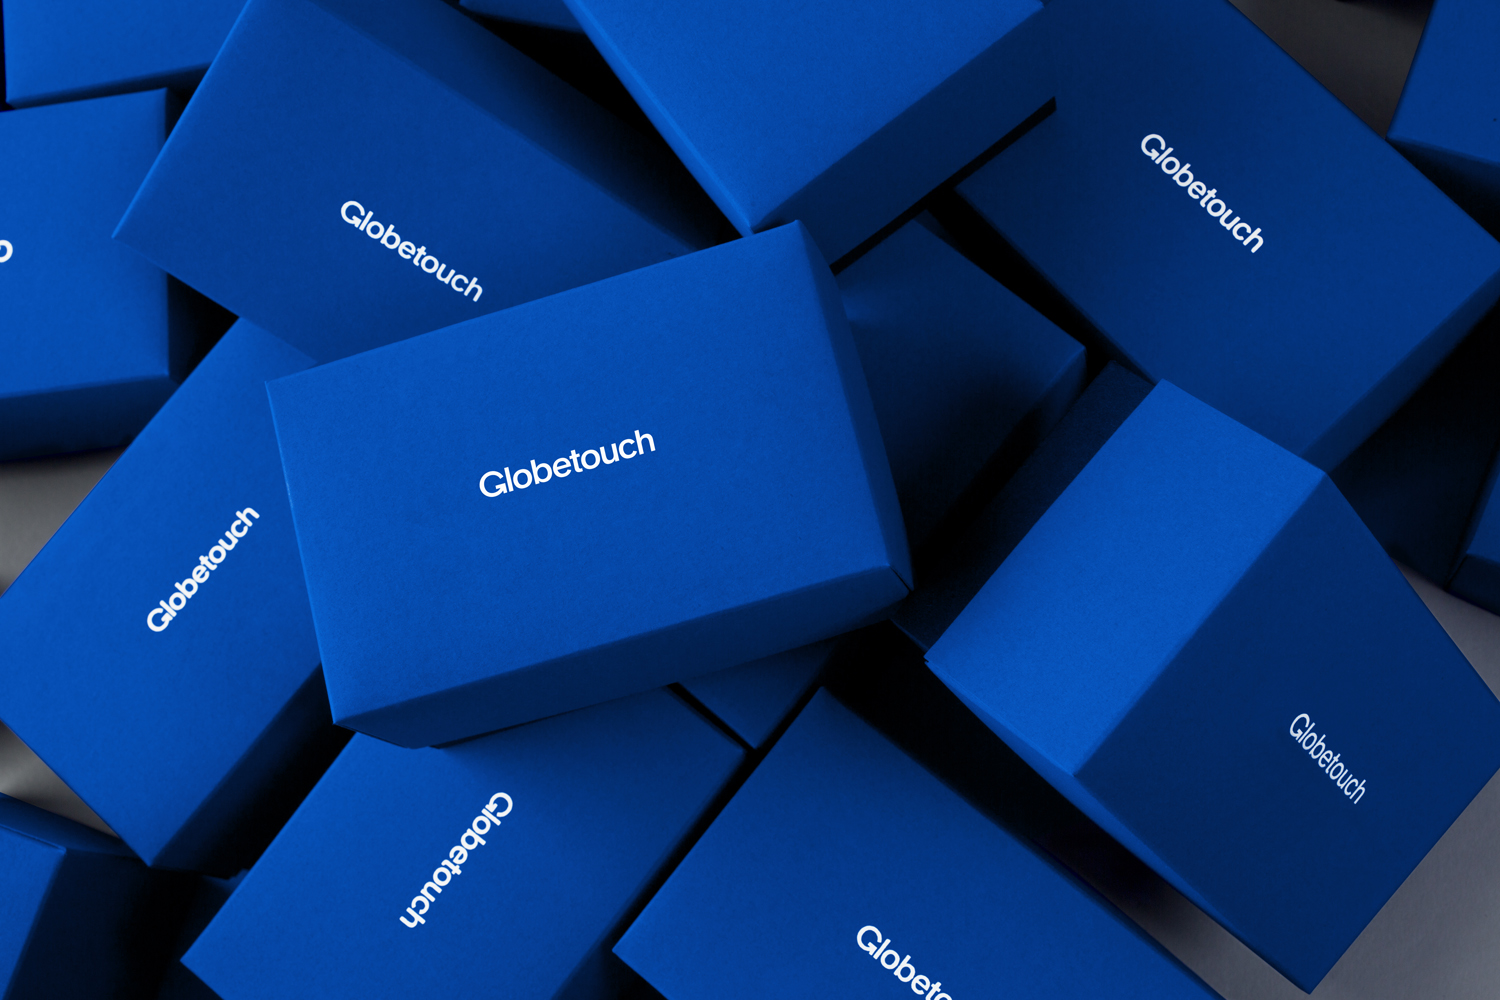 "Classic Blue" Packaging Designs to Celebrate Pantone's 2020 Color of the Year